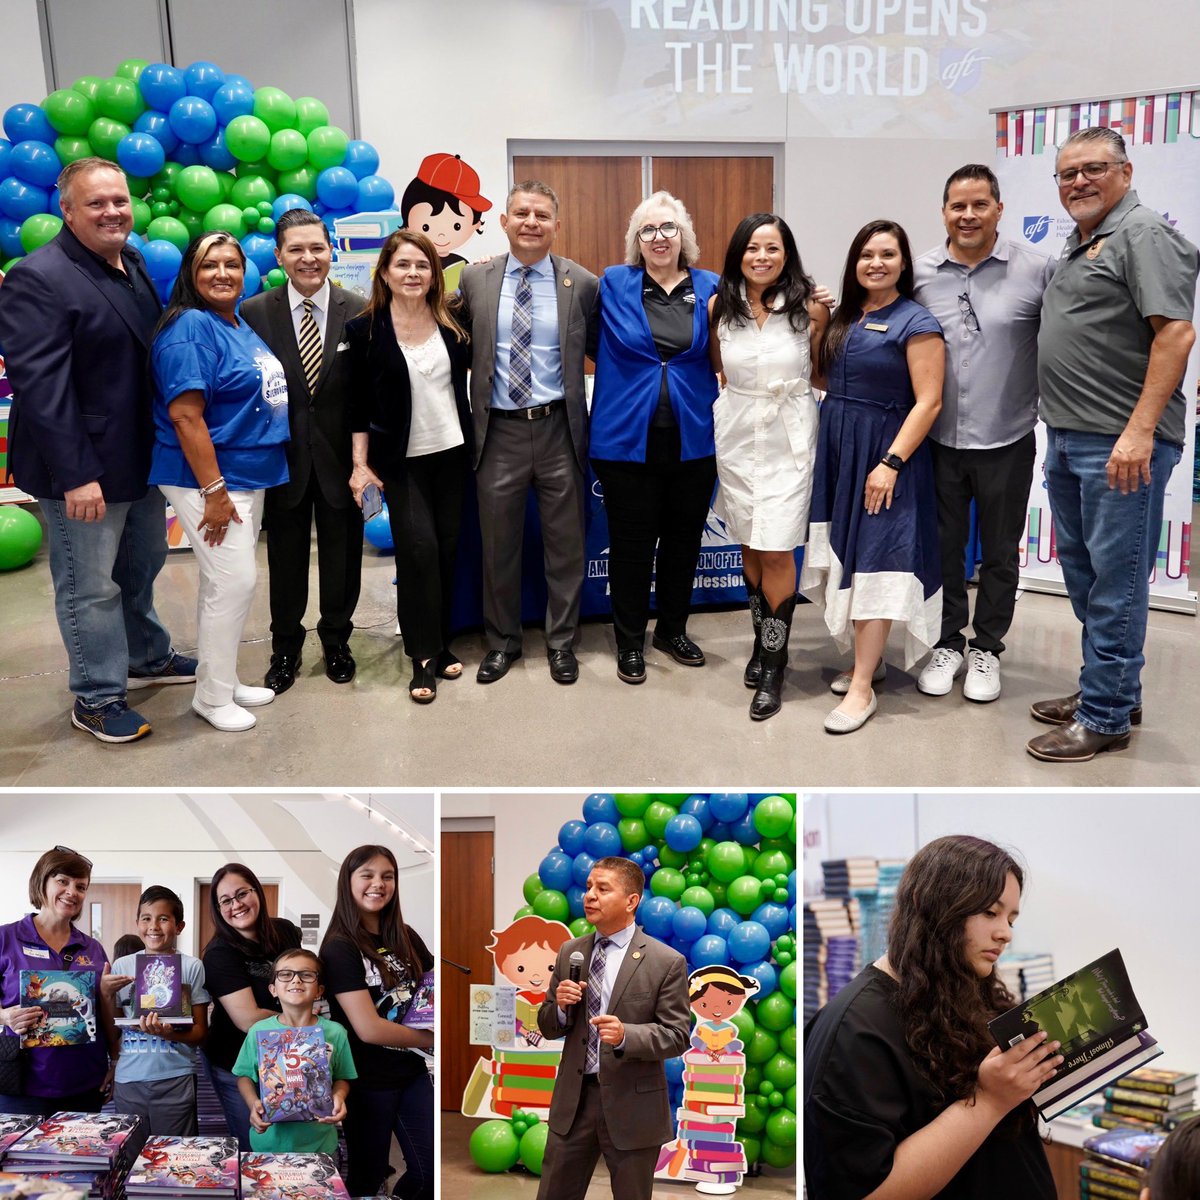 The #TeamSISD celebration is one of five simultaneous celebrations across the country, distributing 150,000 free books in a single day. The Socorro event, AFT and First Book gave away 40,000 free books bringing the total number of books distributed in TX to well over 1.2 million.